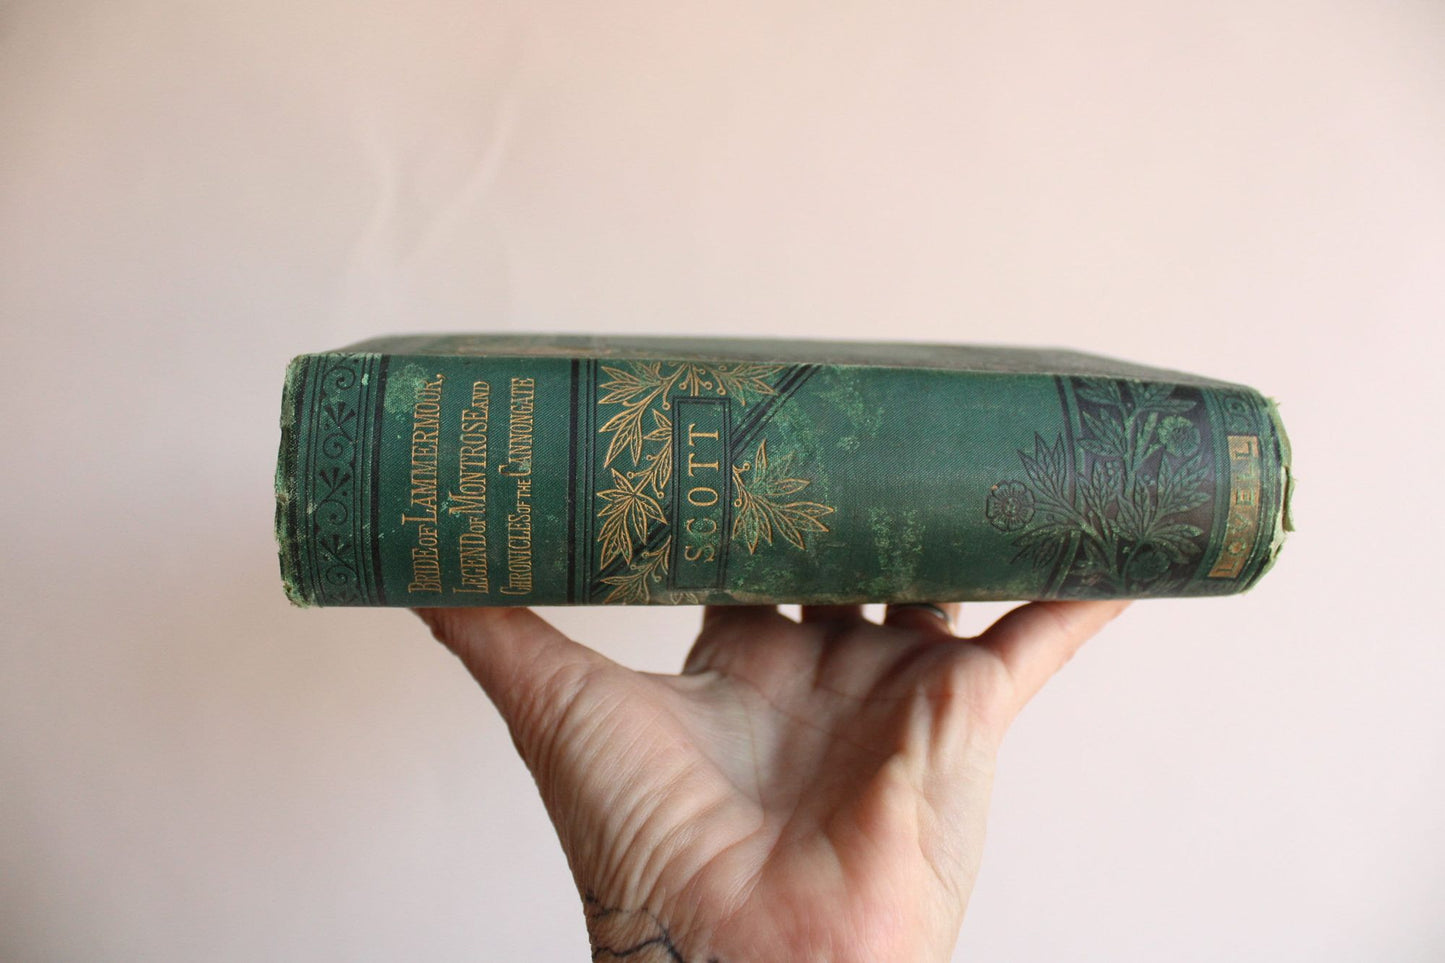 Vintage 1880s Book, Sir Walter Scott "The Waverly Novels, Bride of Lammermoor, Legend of Montrose, Chronicles of Cannongate"